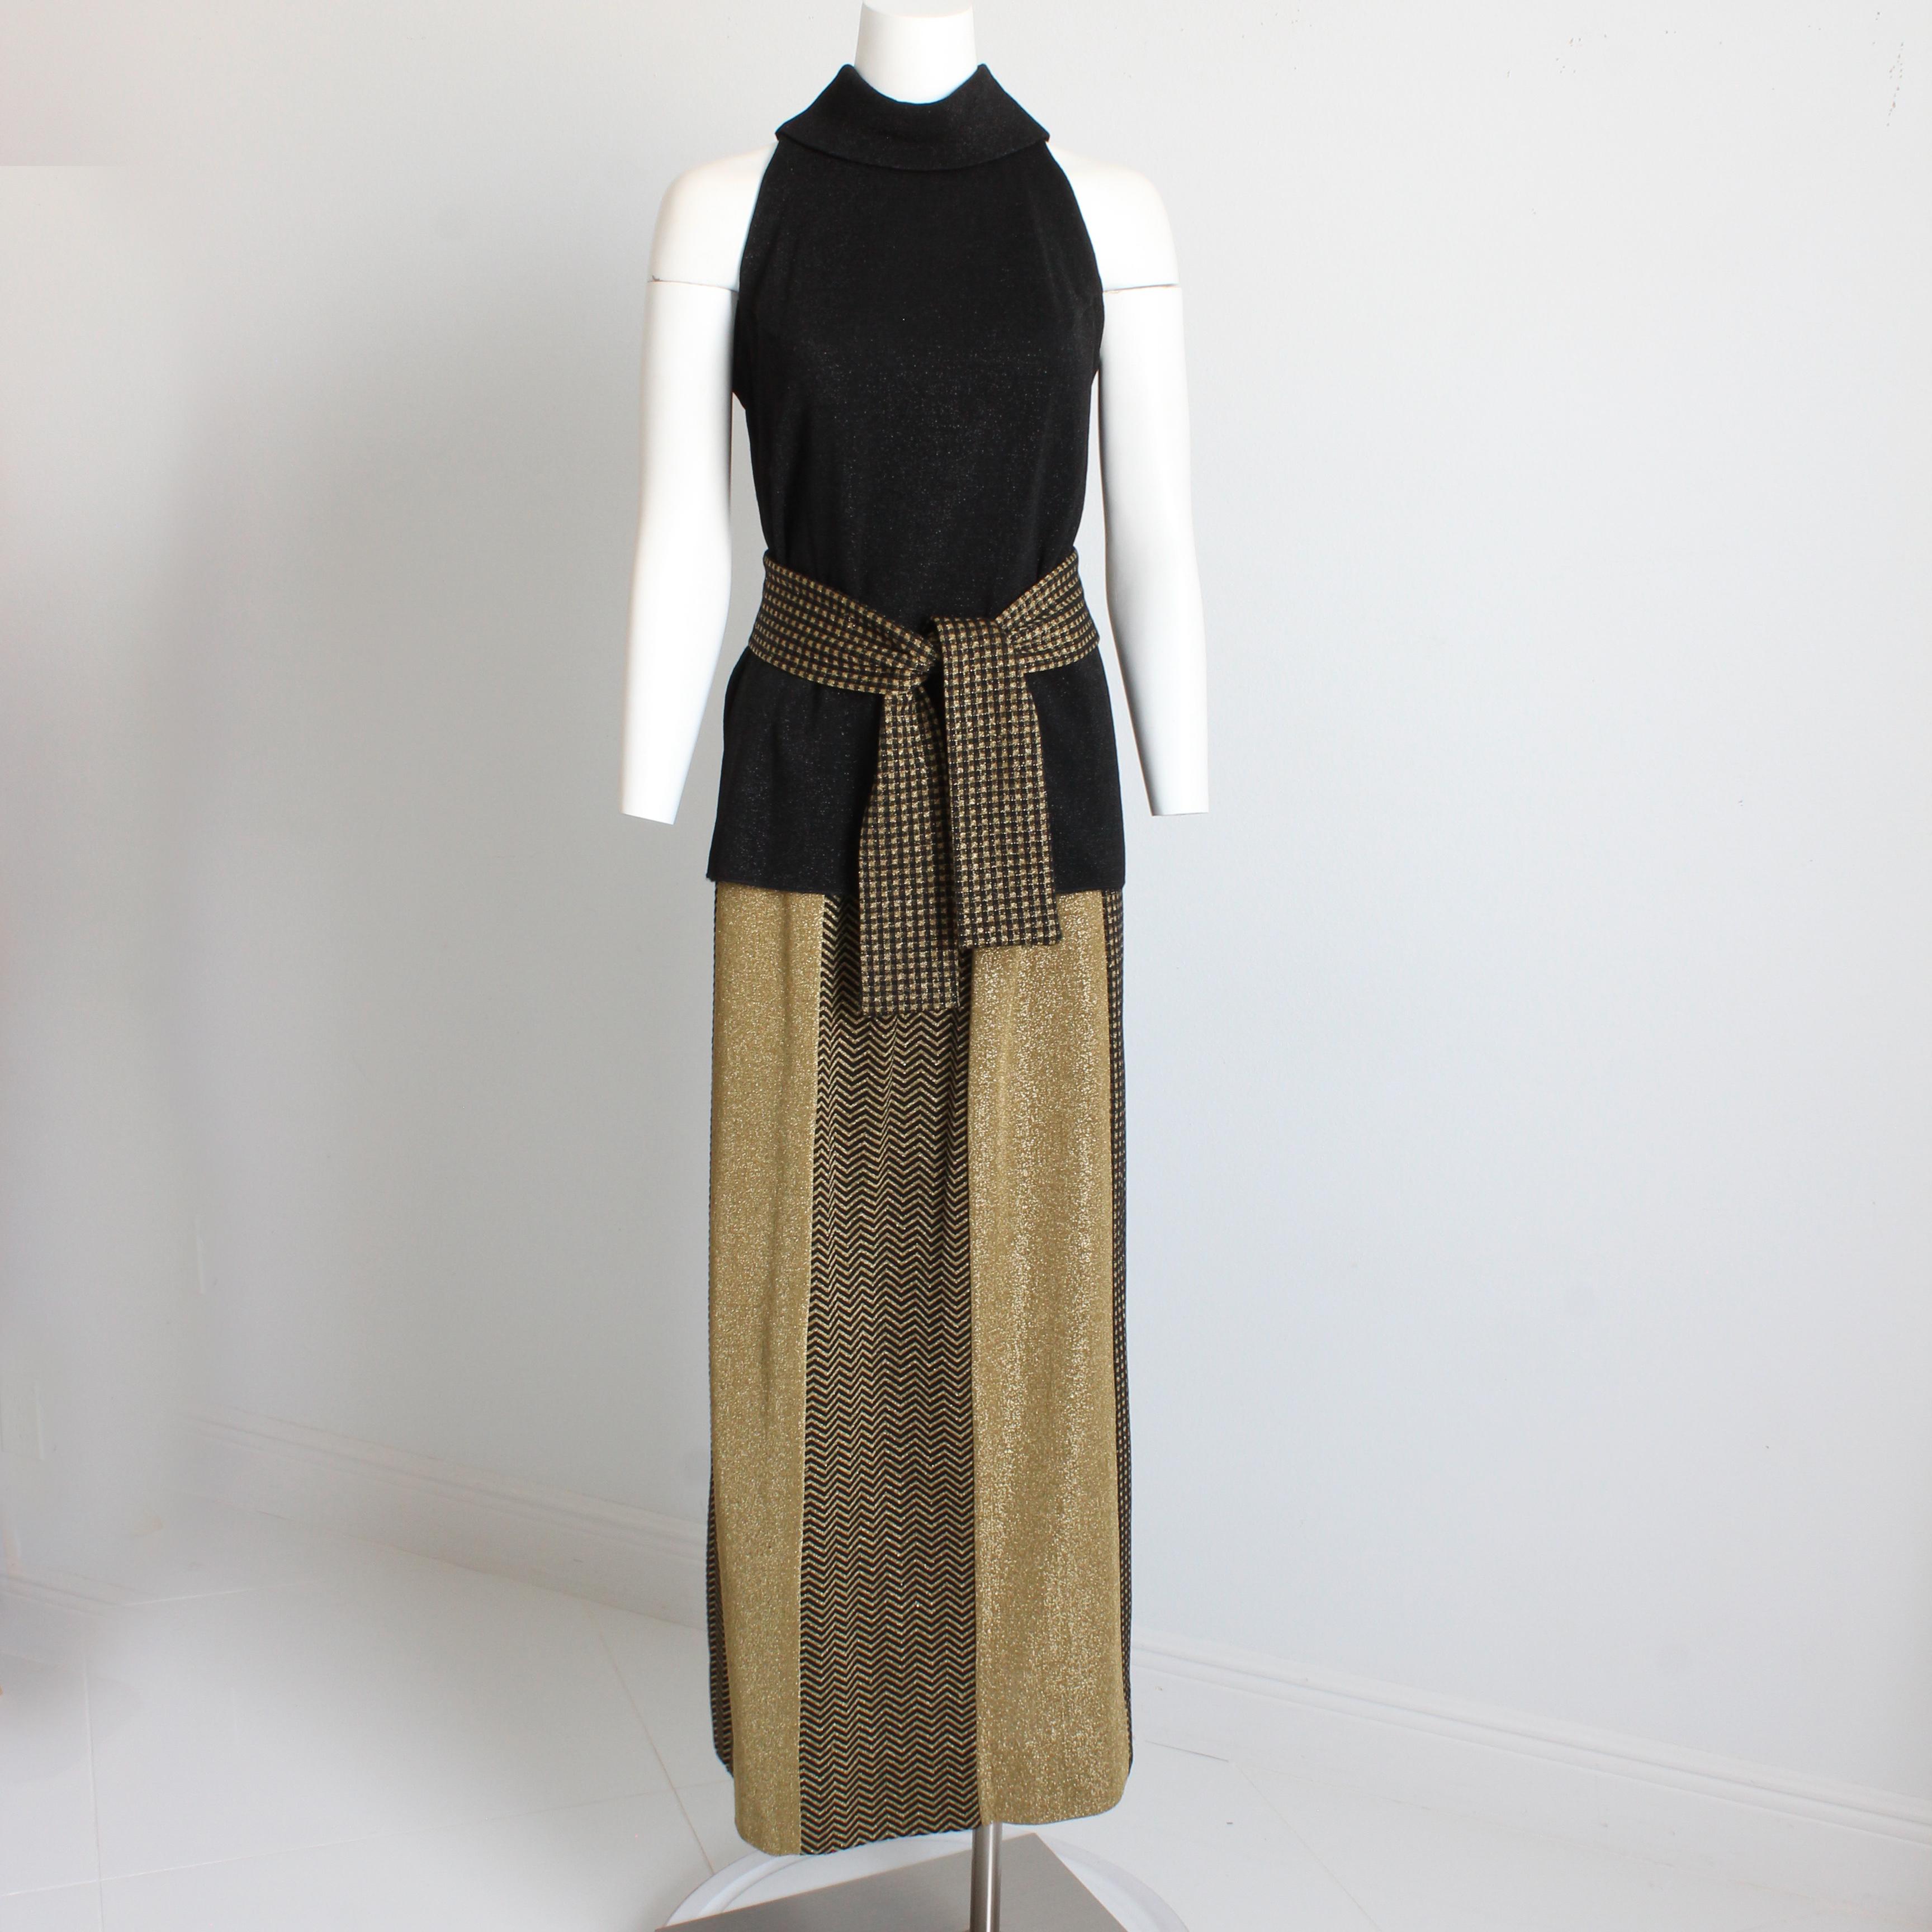 True vintage 3pc knit top, sash and skirt set, made by designer Rudi Gernreich, most likely made in the 1970s. Gernreich was known for his knitwear - and designed for Harmon Knits from the late 50s up through the 70s.  This set is a great example of